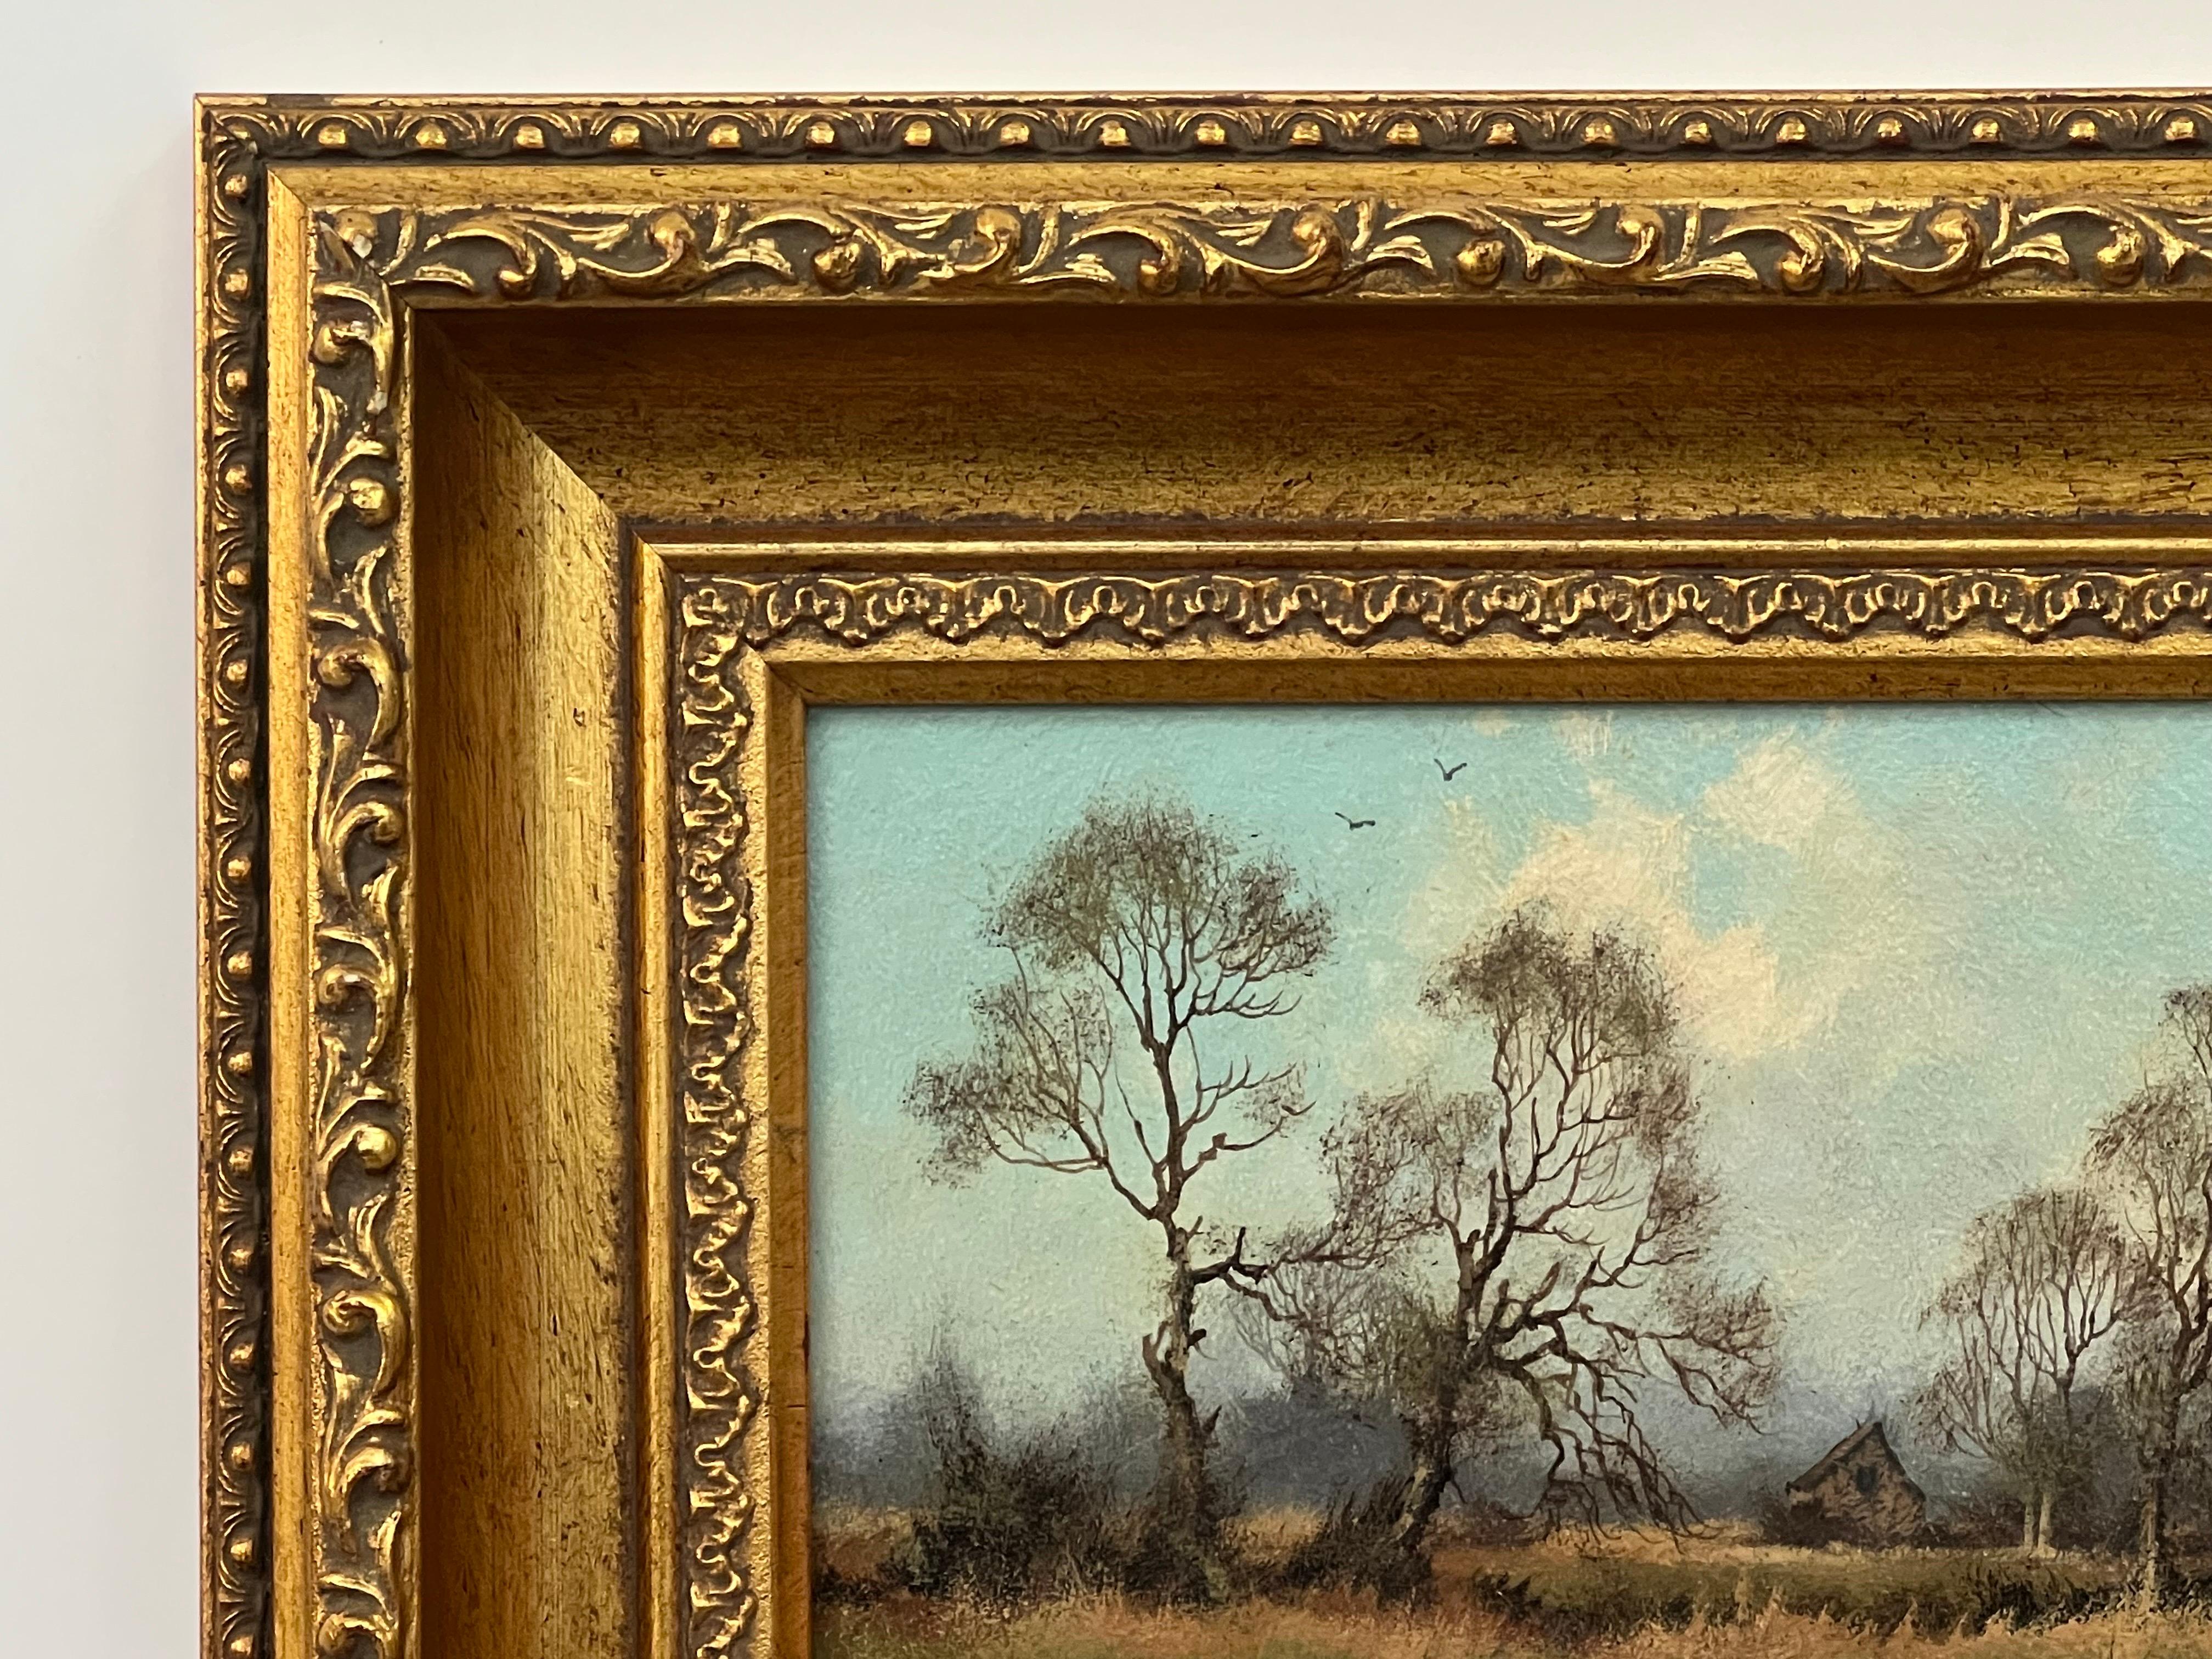 Trees & Cottage in the English Countryside by 20th Century British Landscape Artist, James Wright

Signed, Original, Oil on Canvas, housed in a beautiful ornate gold frame.
Provenance: Part of the English Heritage Series No.428

Art measures 7 x 5